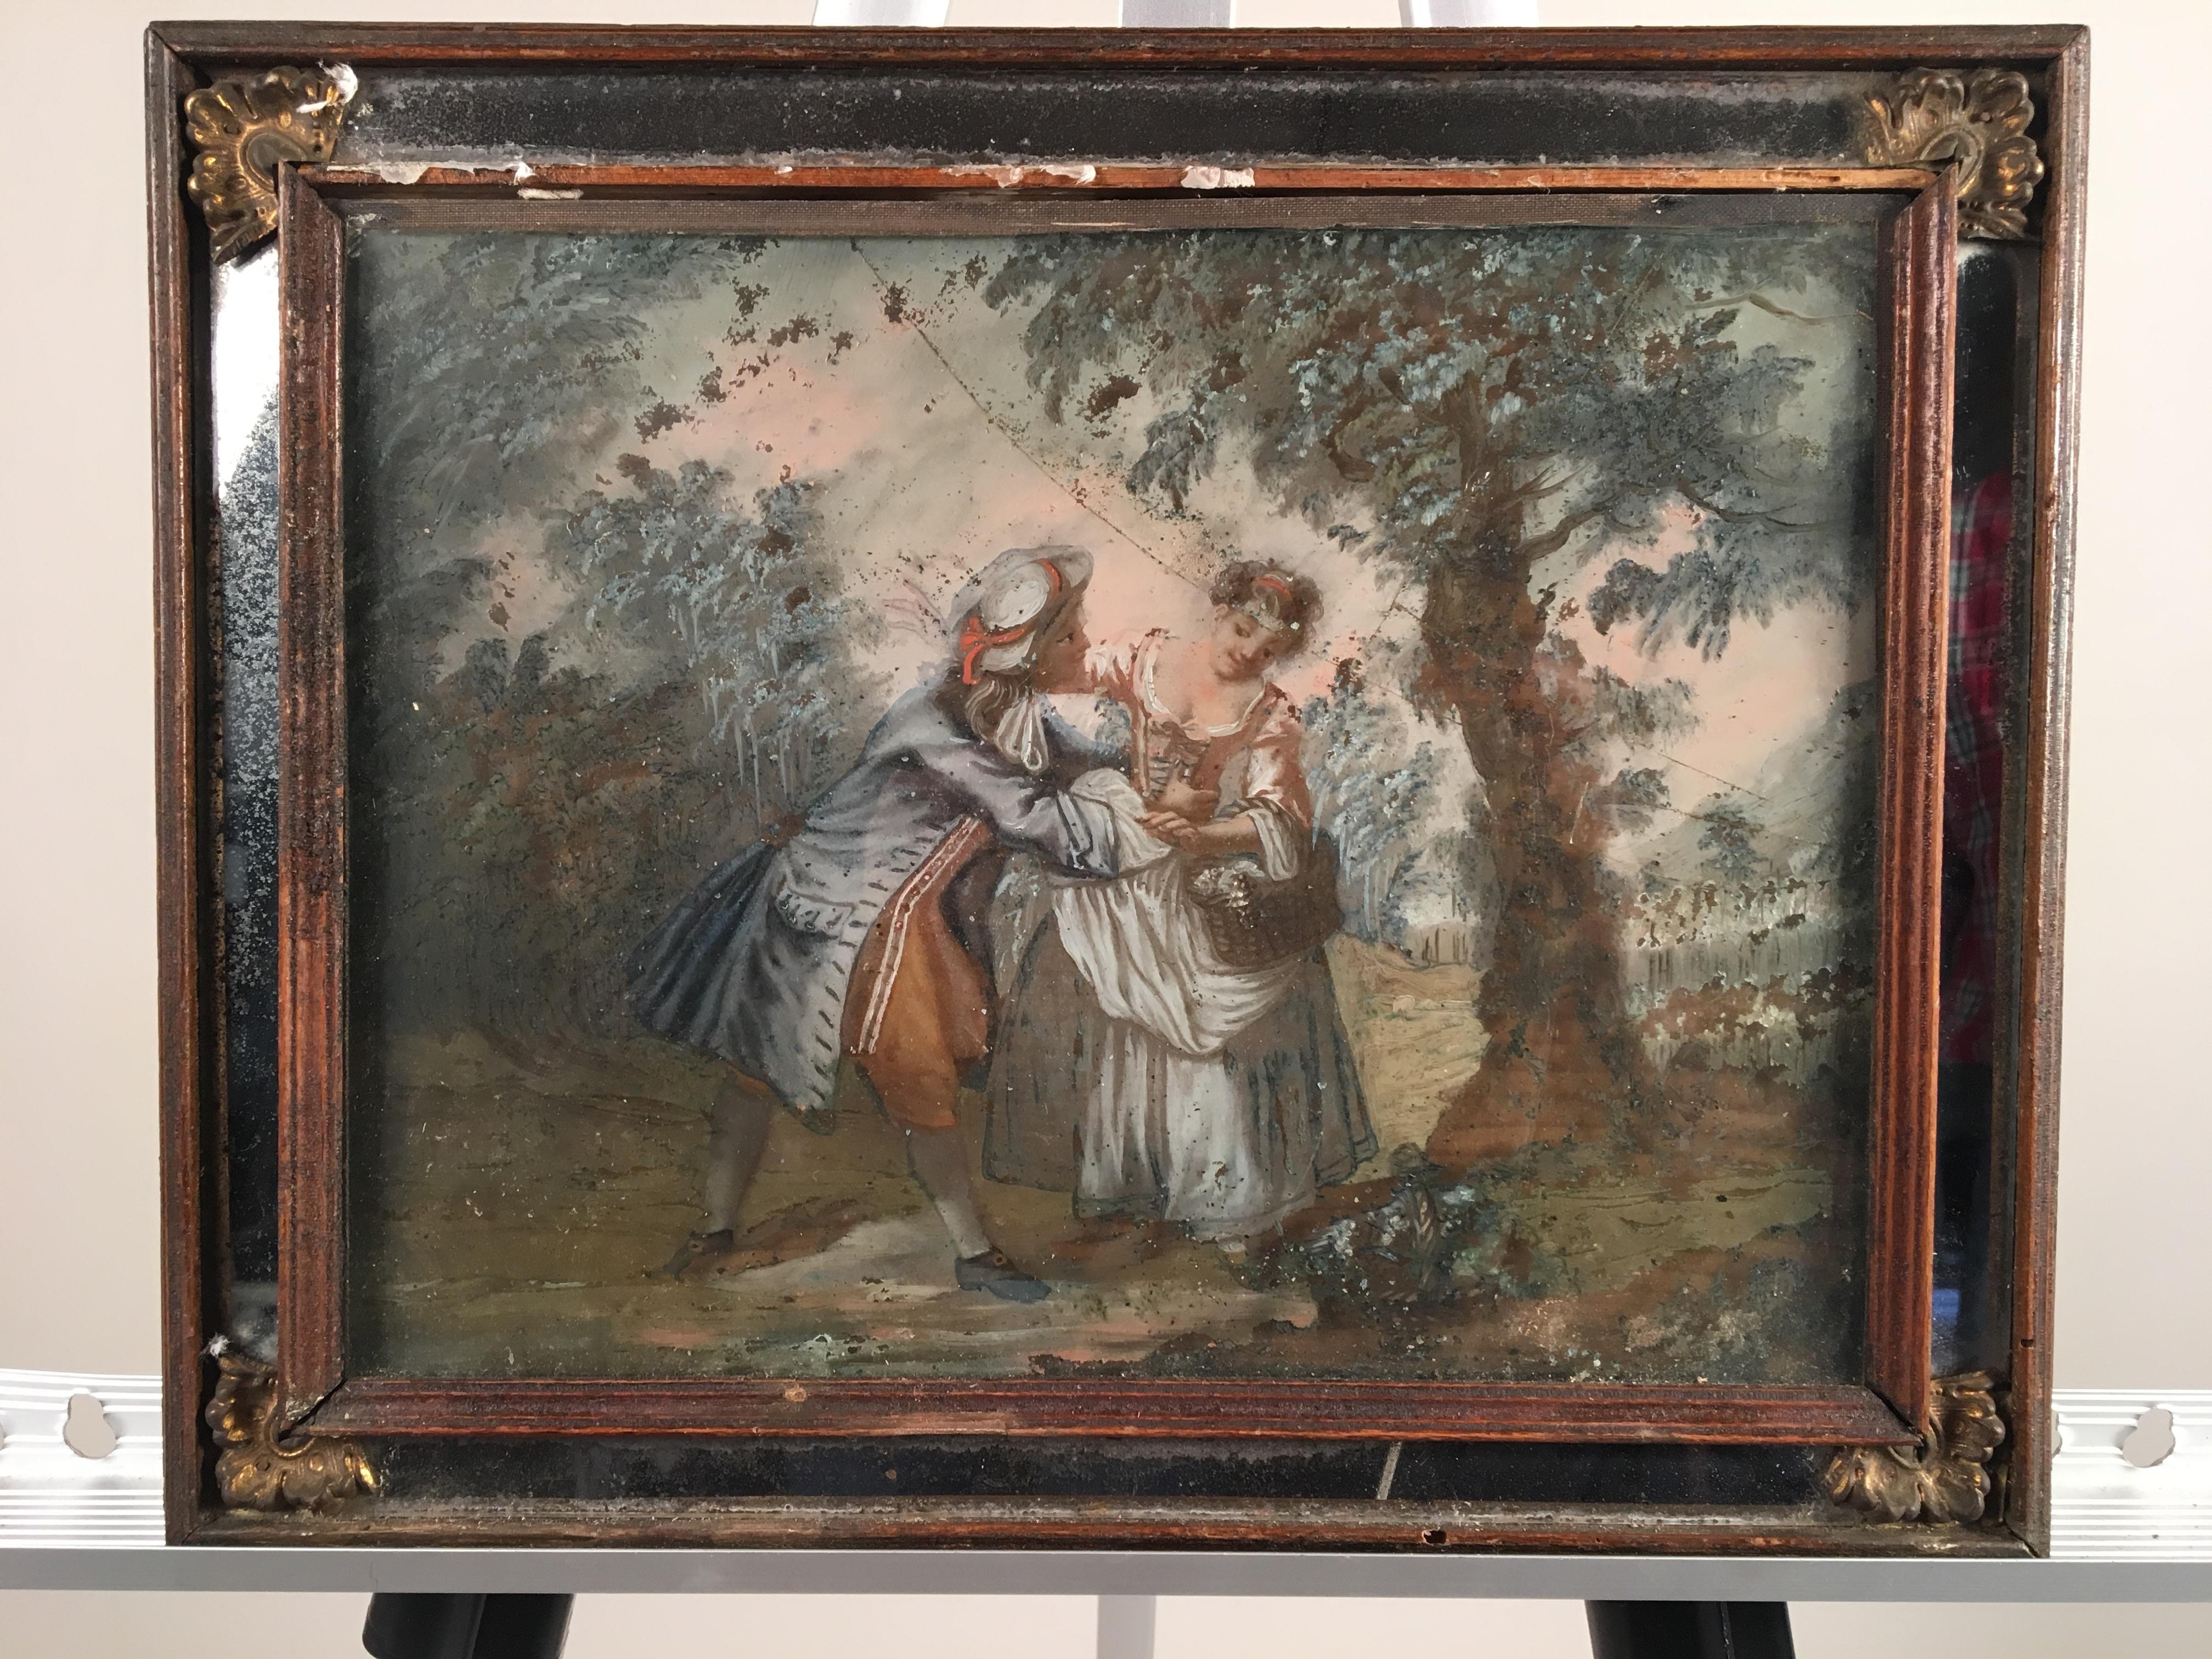 A pair of French reverse paintings on glass of Romantic themes, each framed in mirrored frames, mid-19th century.